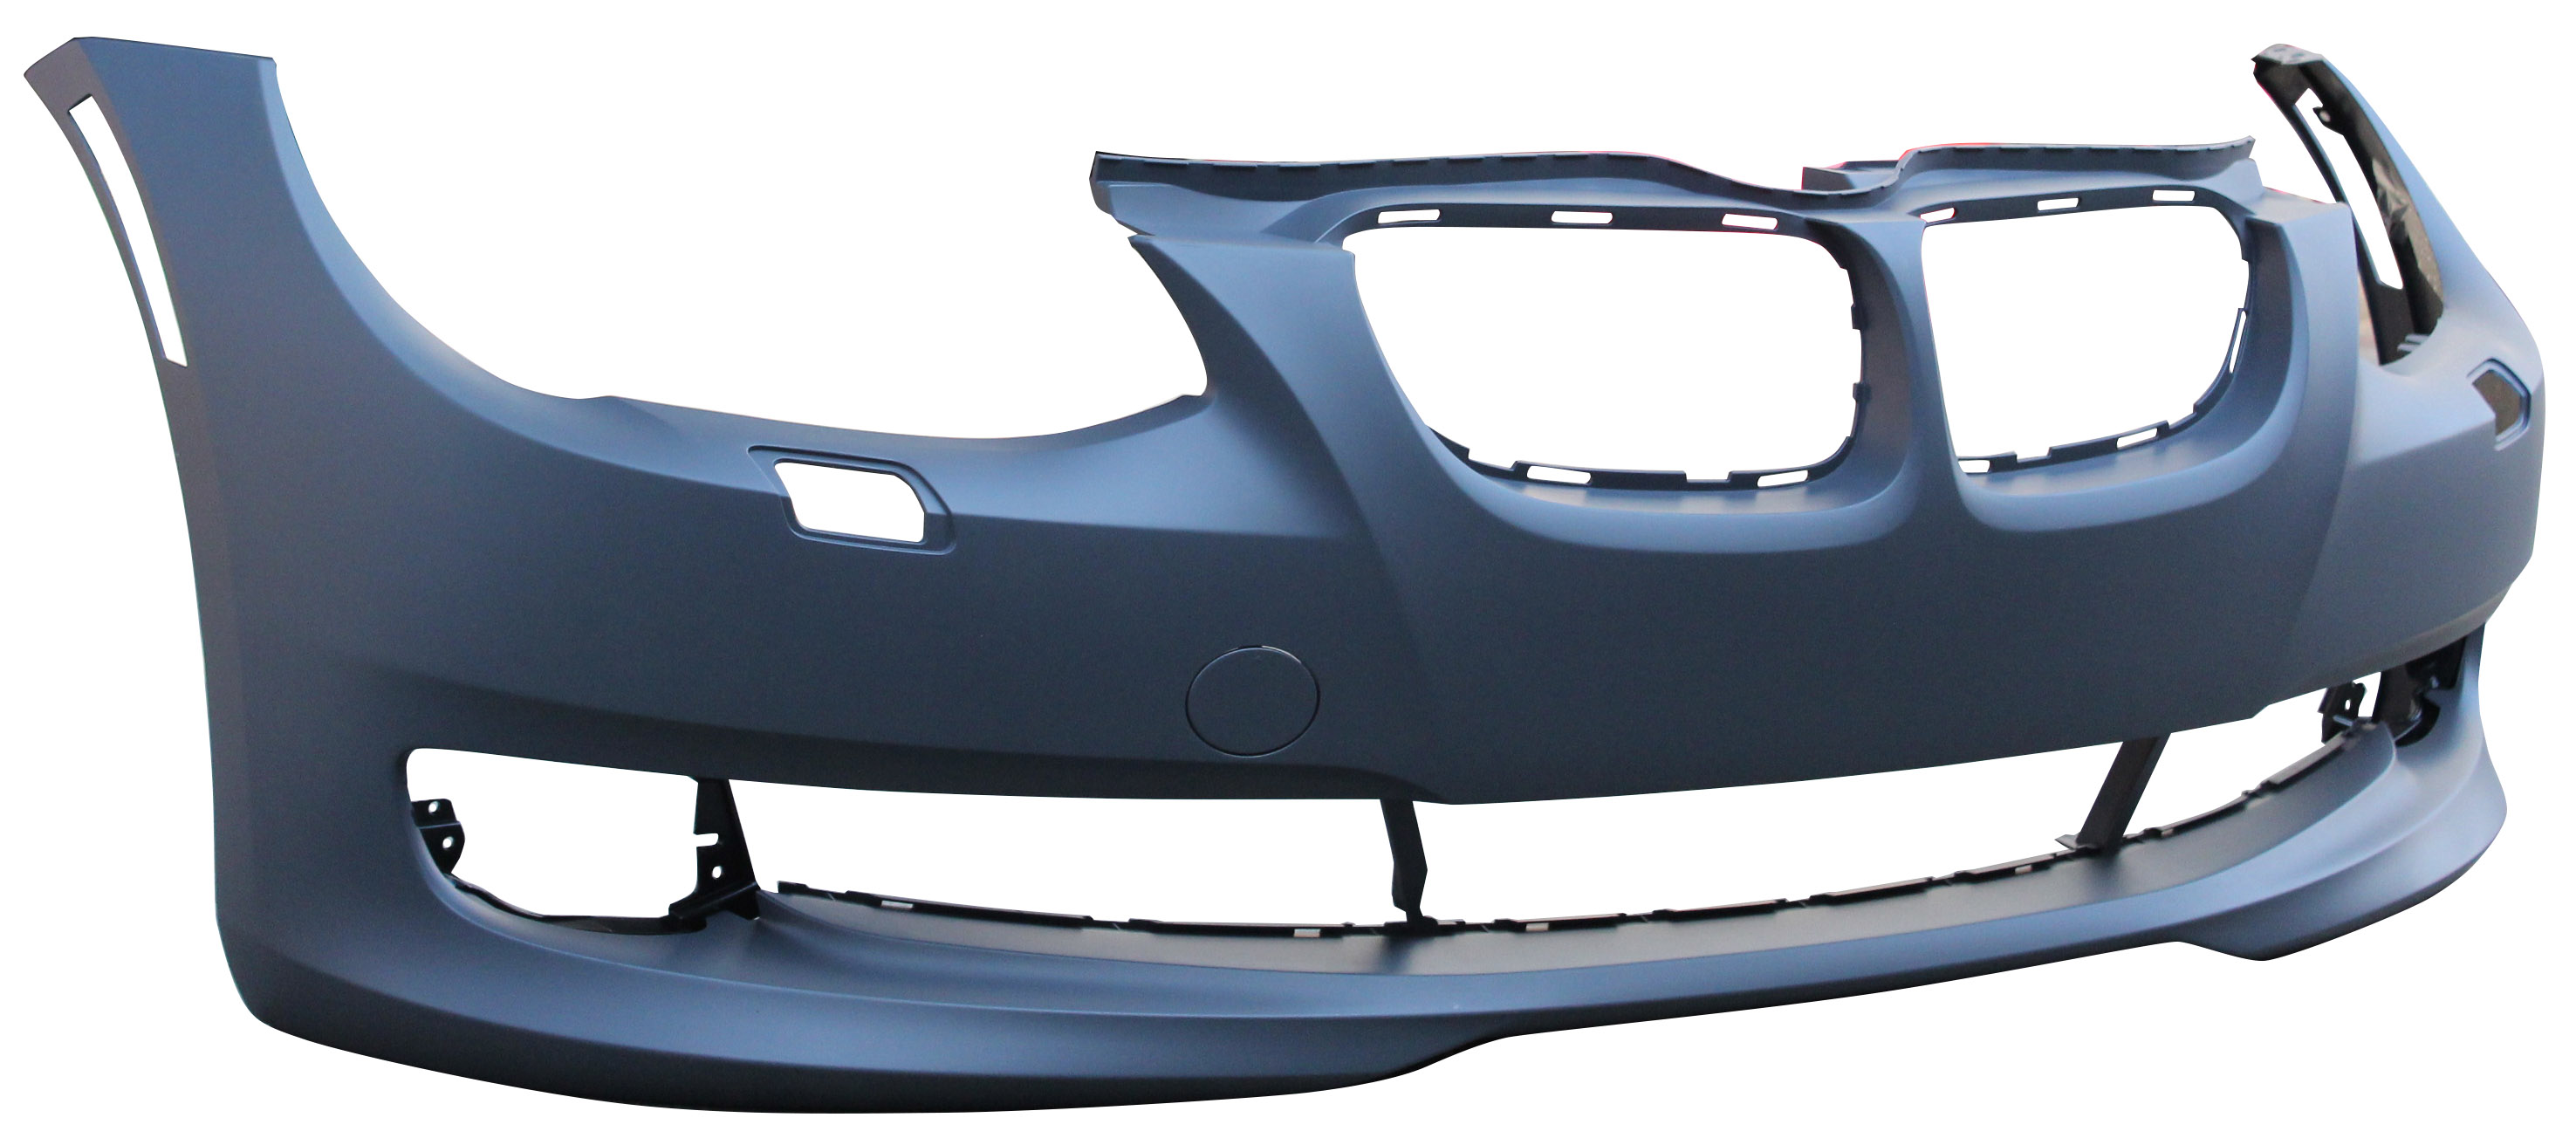 Aftermarket BUMPER COVERS for BMW - 328I, 328i,11-13,Front bumper cover